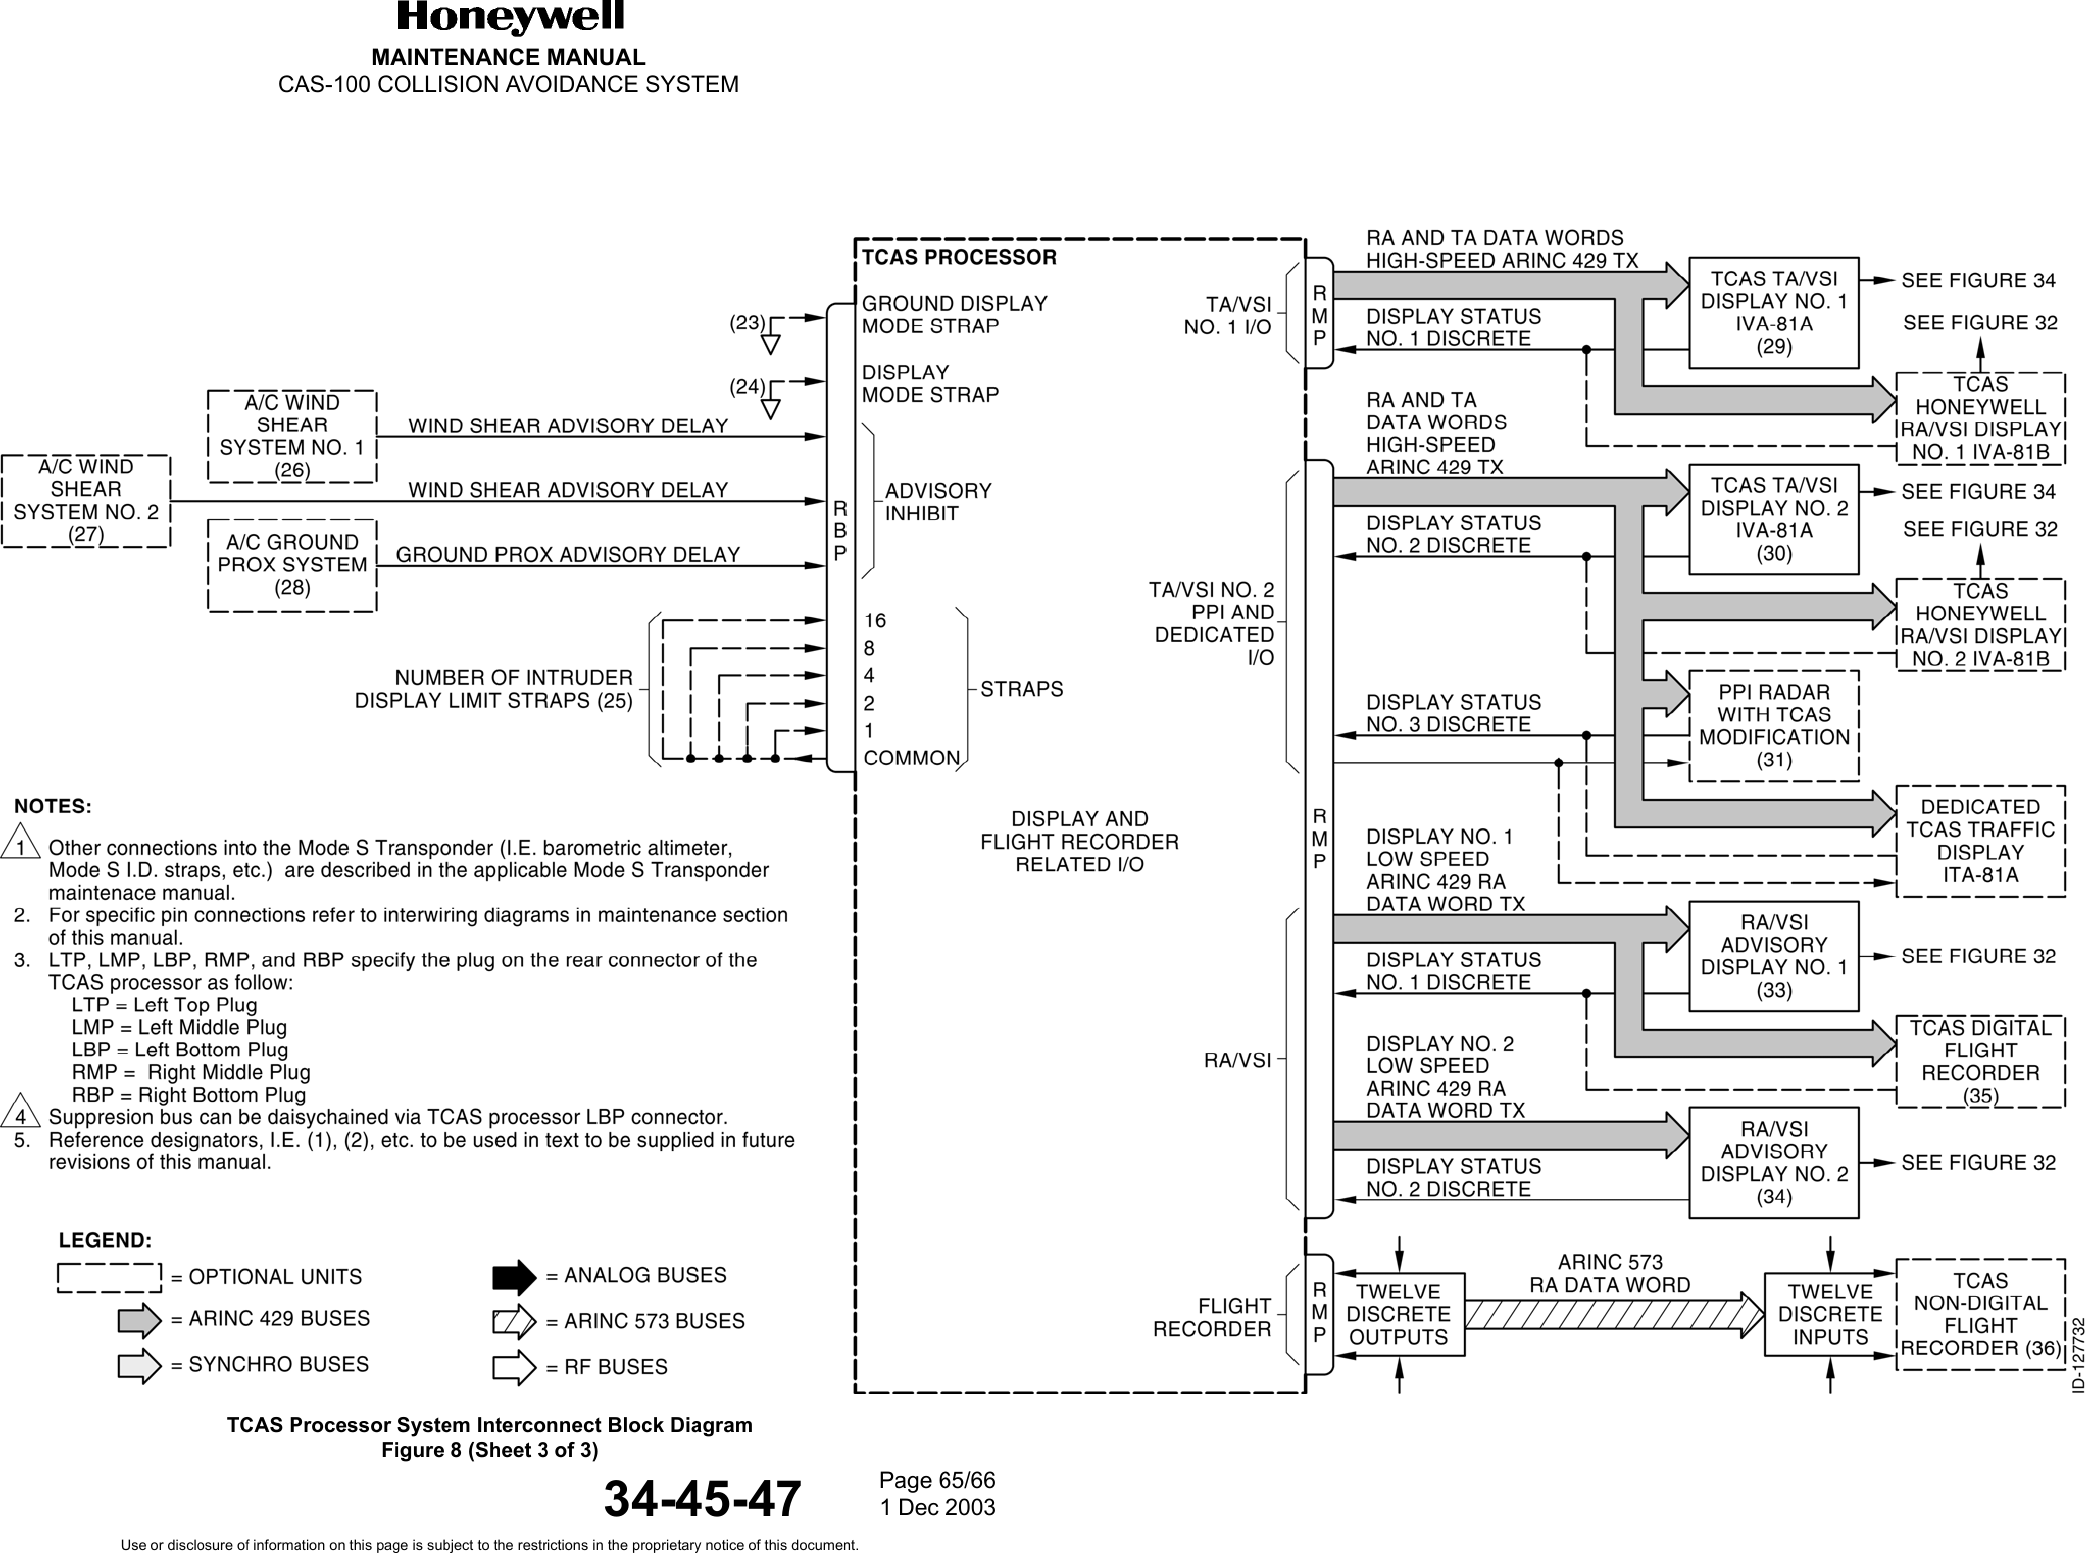 MAINTENANCE MANUALCAS-100 COLLISION AVOIDANCE SYSTEM34-45-47TCAS Processor System Interconnect Block DiagramFigure 8 (Sheet 3 of 3)Page 65/661 Dec 2003Use or disclosure of information on this page is subject to the restrictions in the proprietary notice of this document.